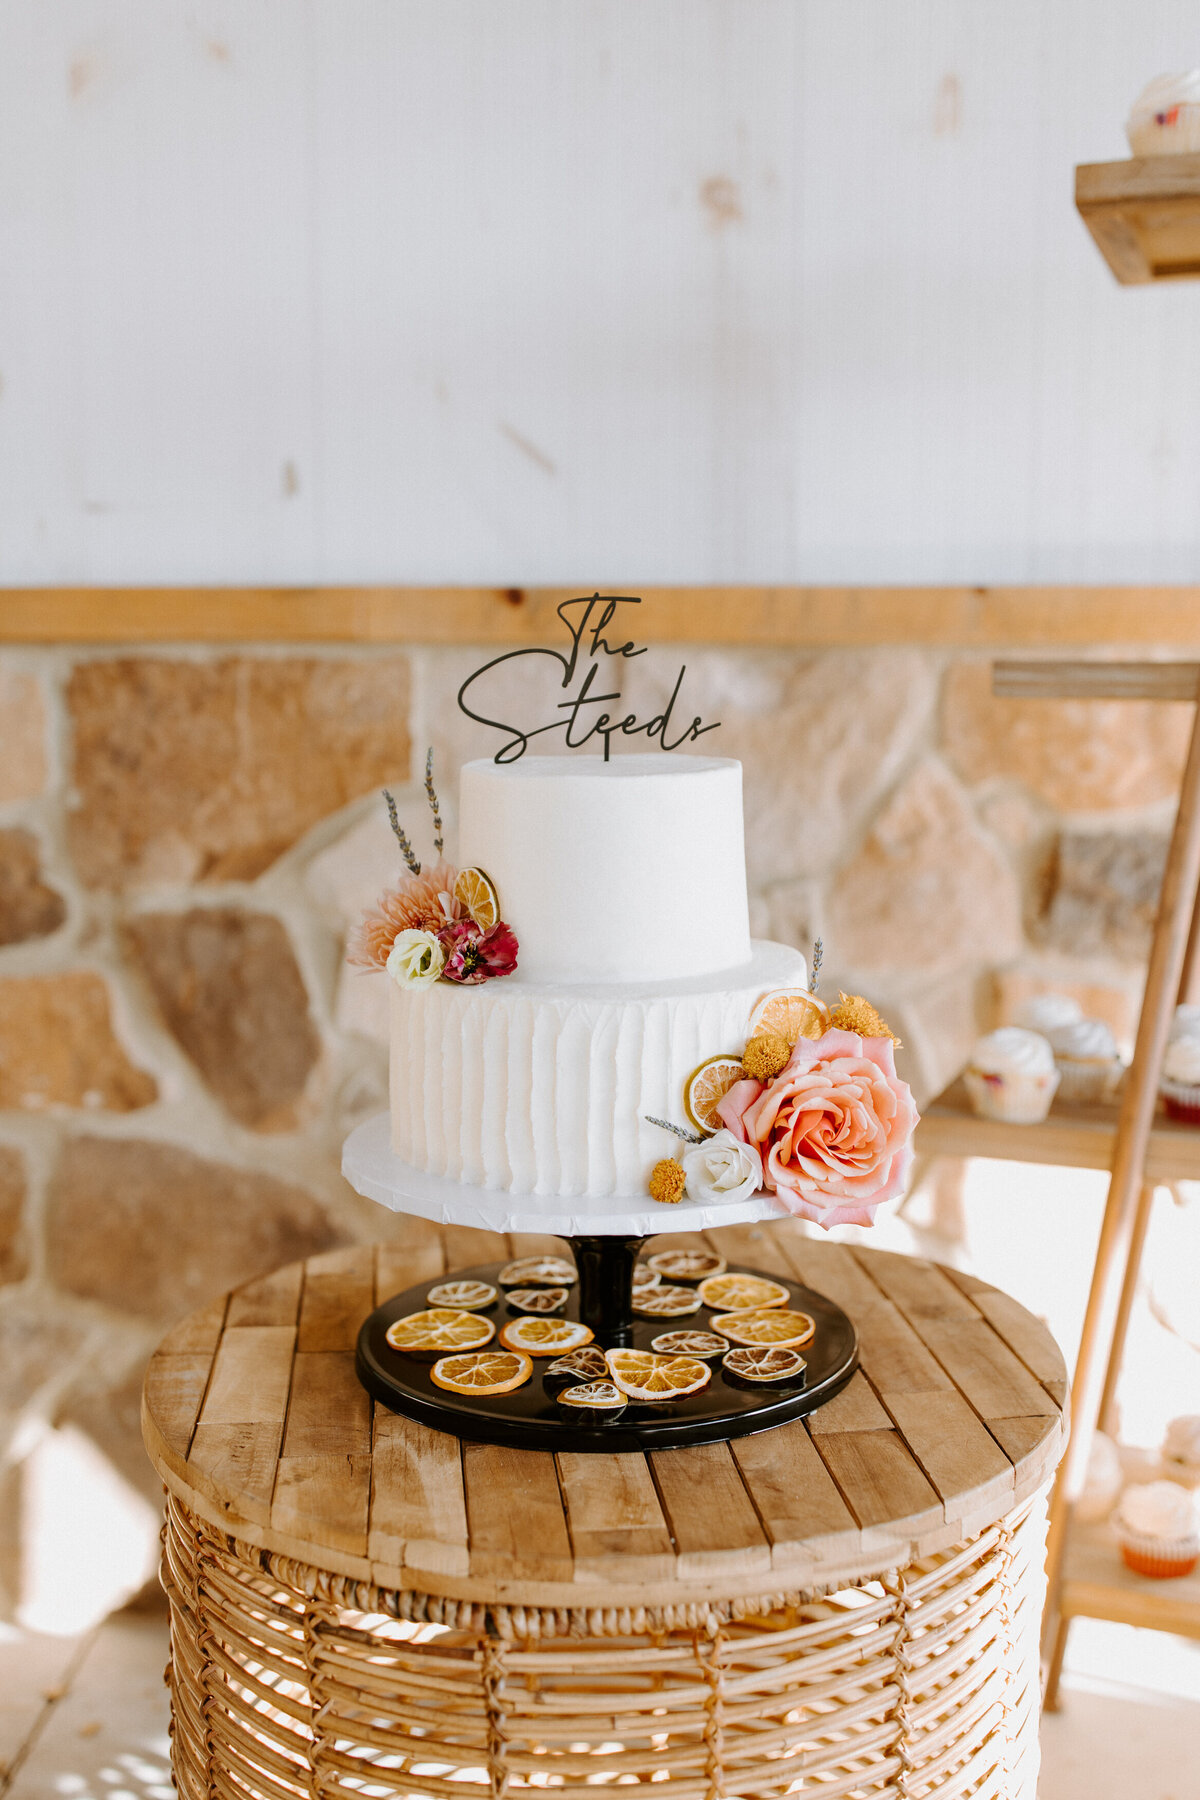 two-tiered wedding cake with flowers on it on a wood table